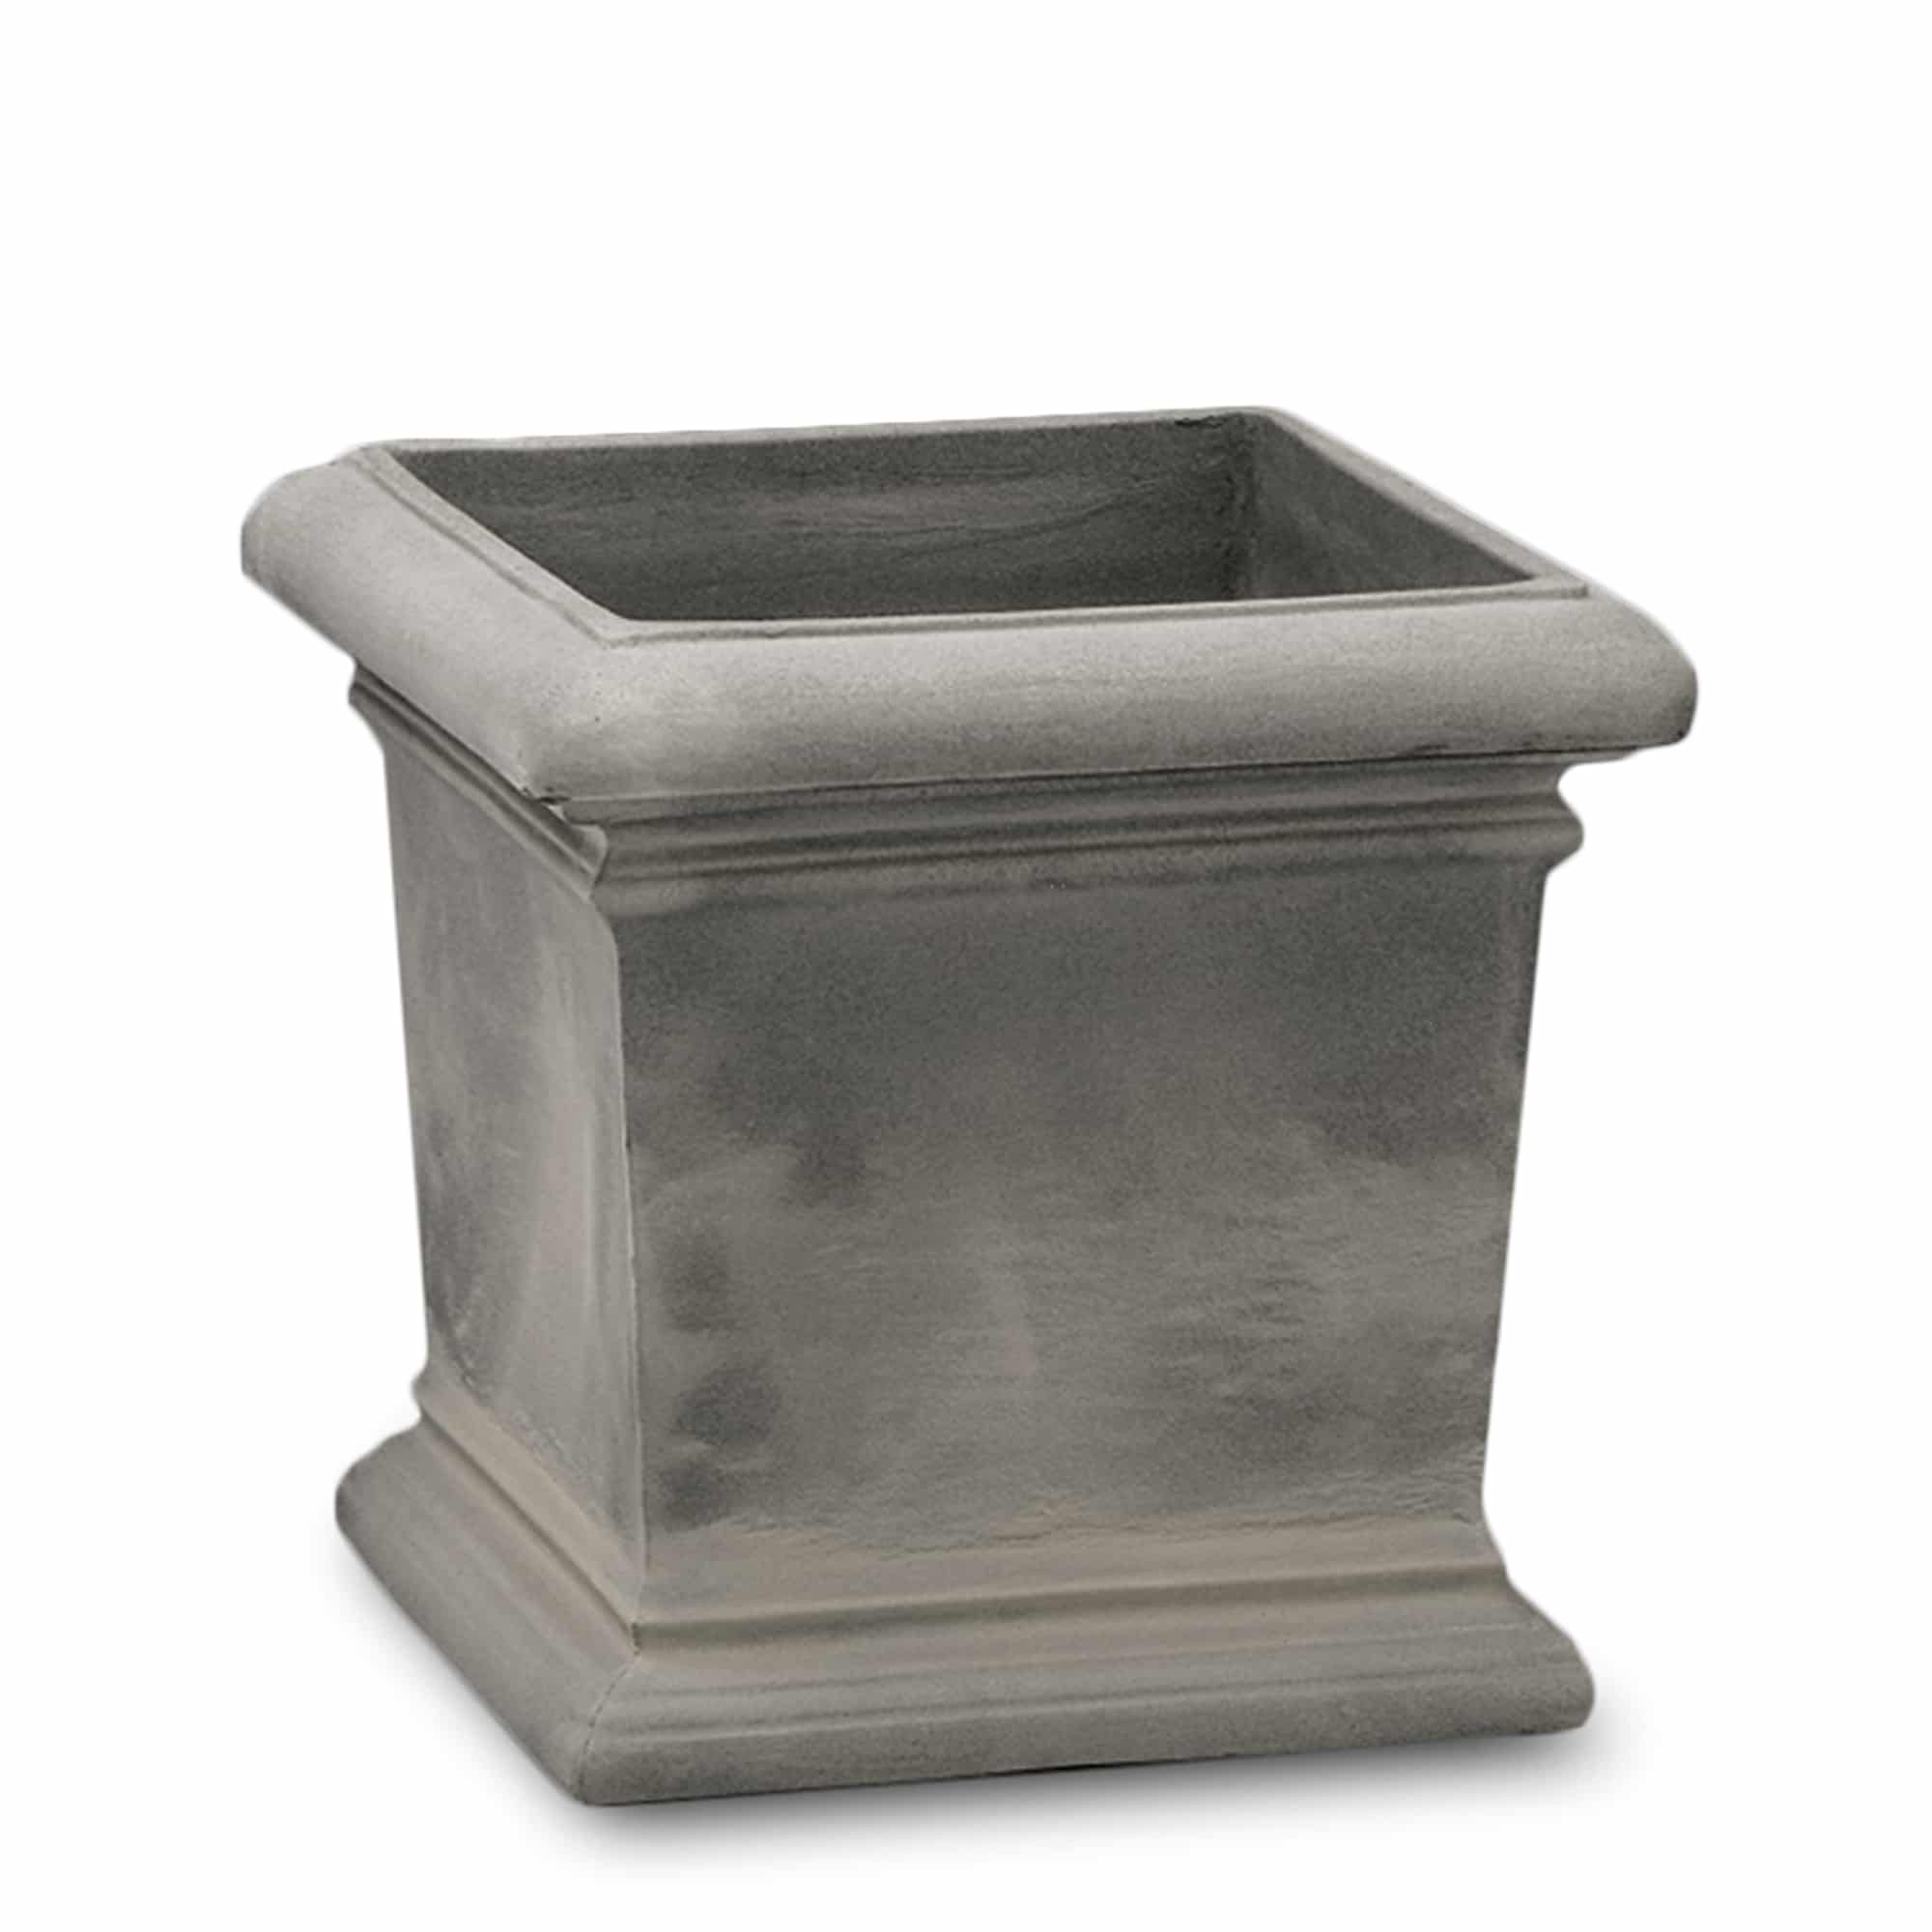 Dorchester Planter in Weathered Gray-Stone Grey